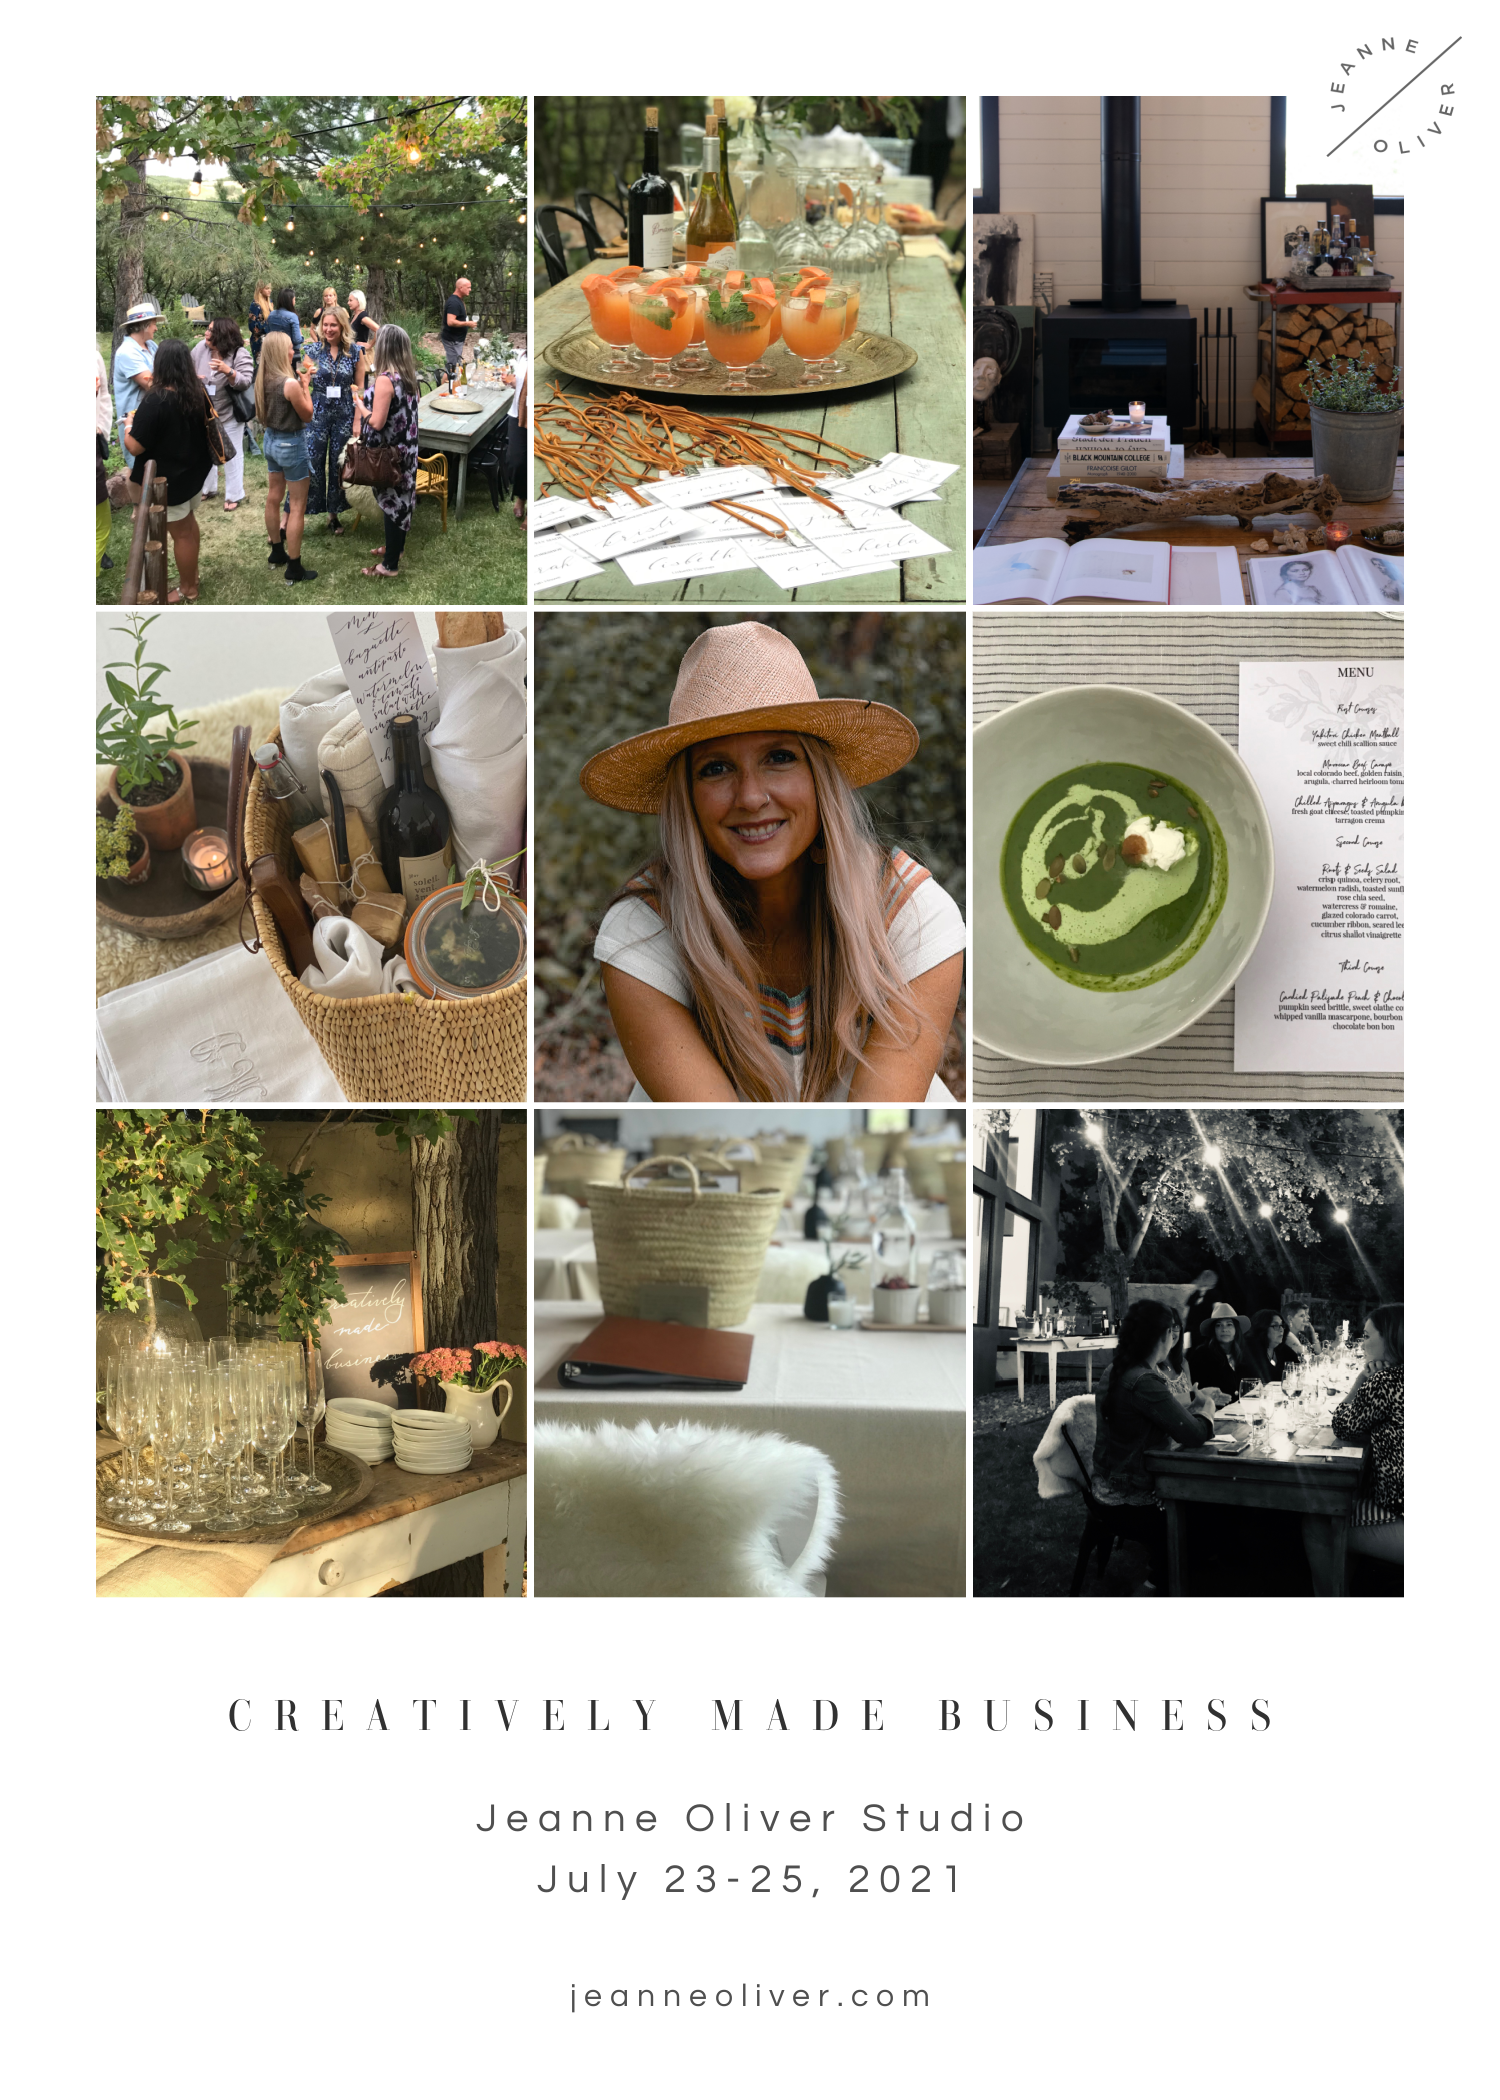 Come to our LAST live Creatively Made Business Workshop | A Few Spots Left!